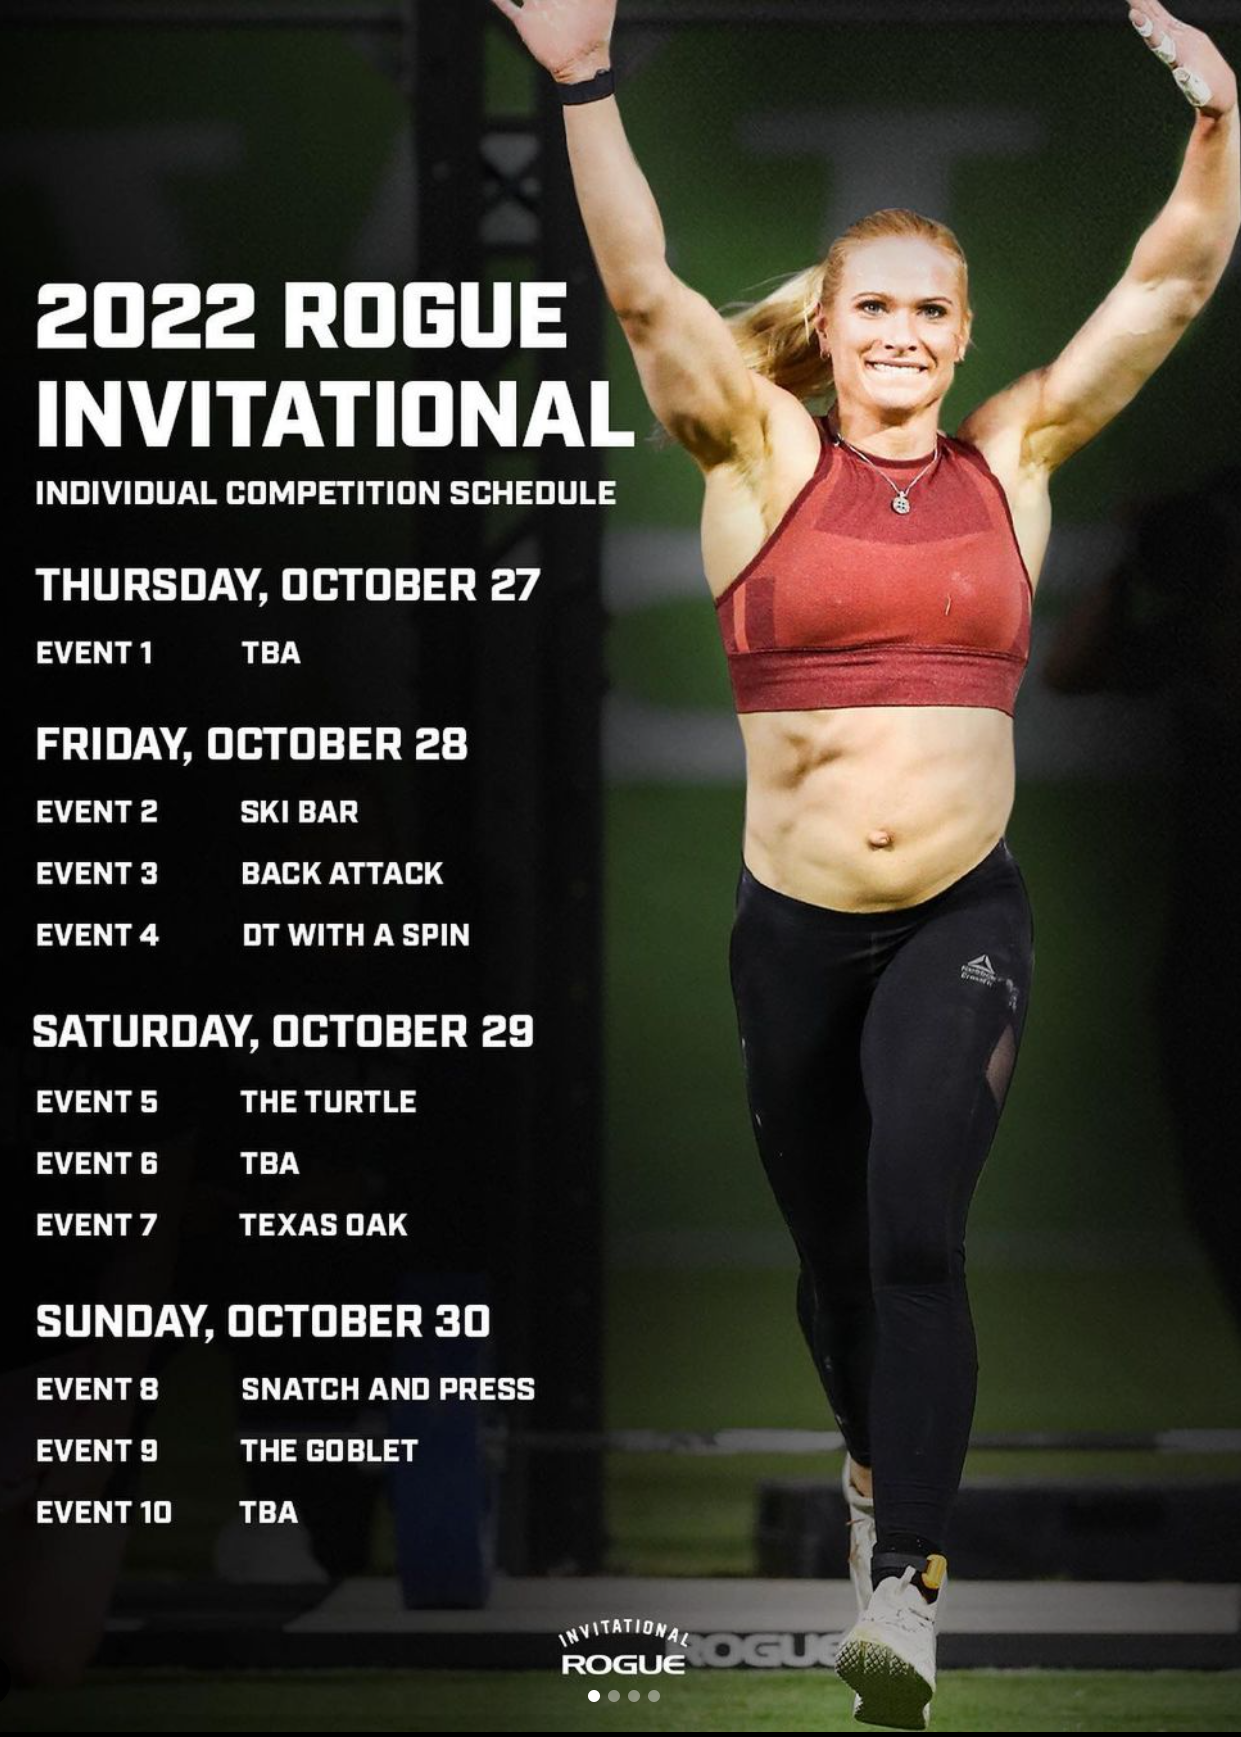 Rogue Invitational 2022, Where to Watch & Athletes from Australia /New